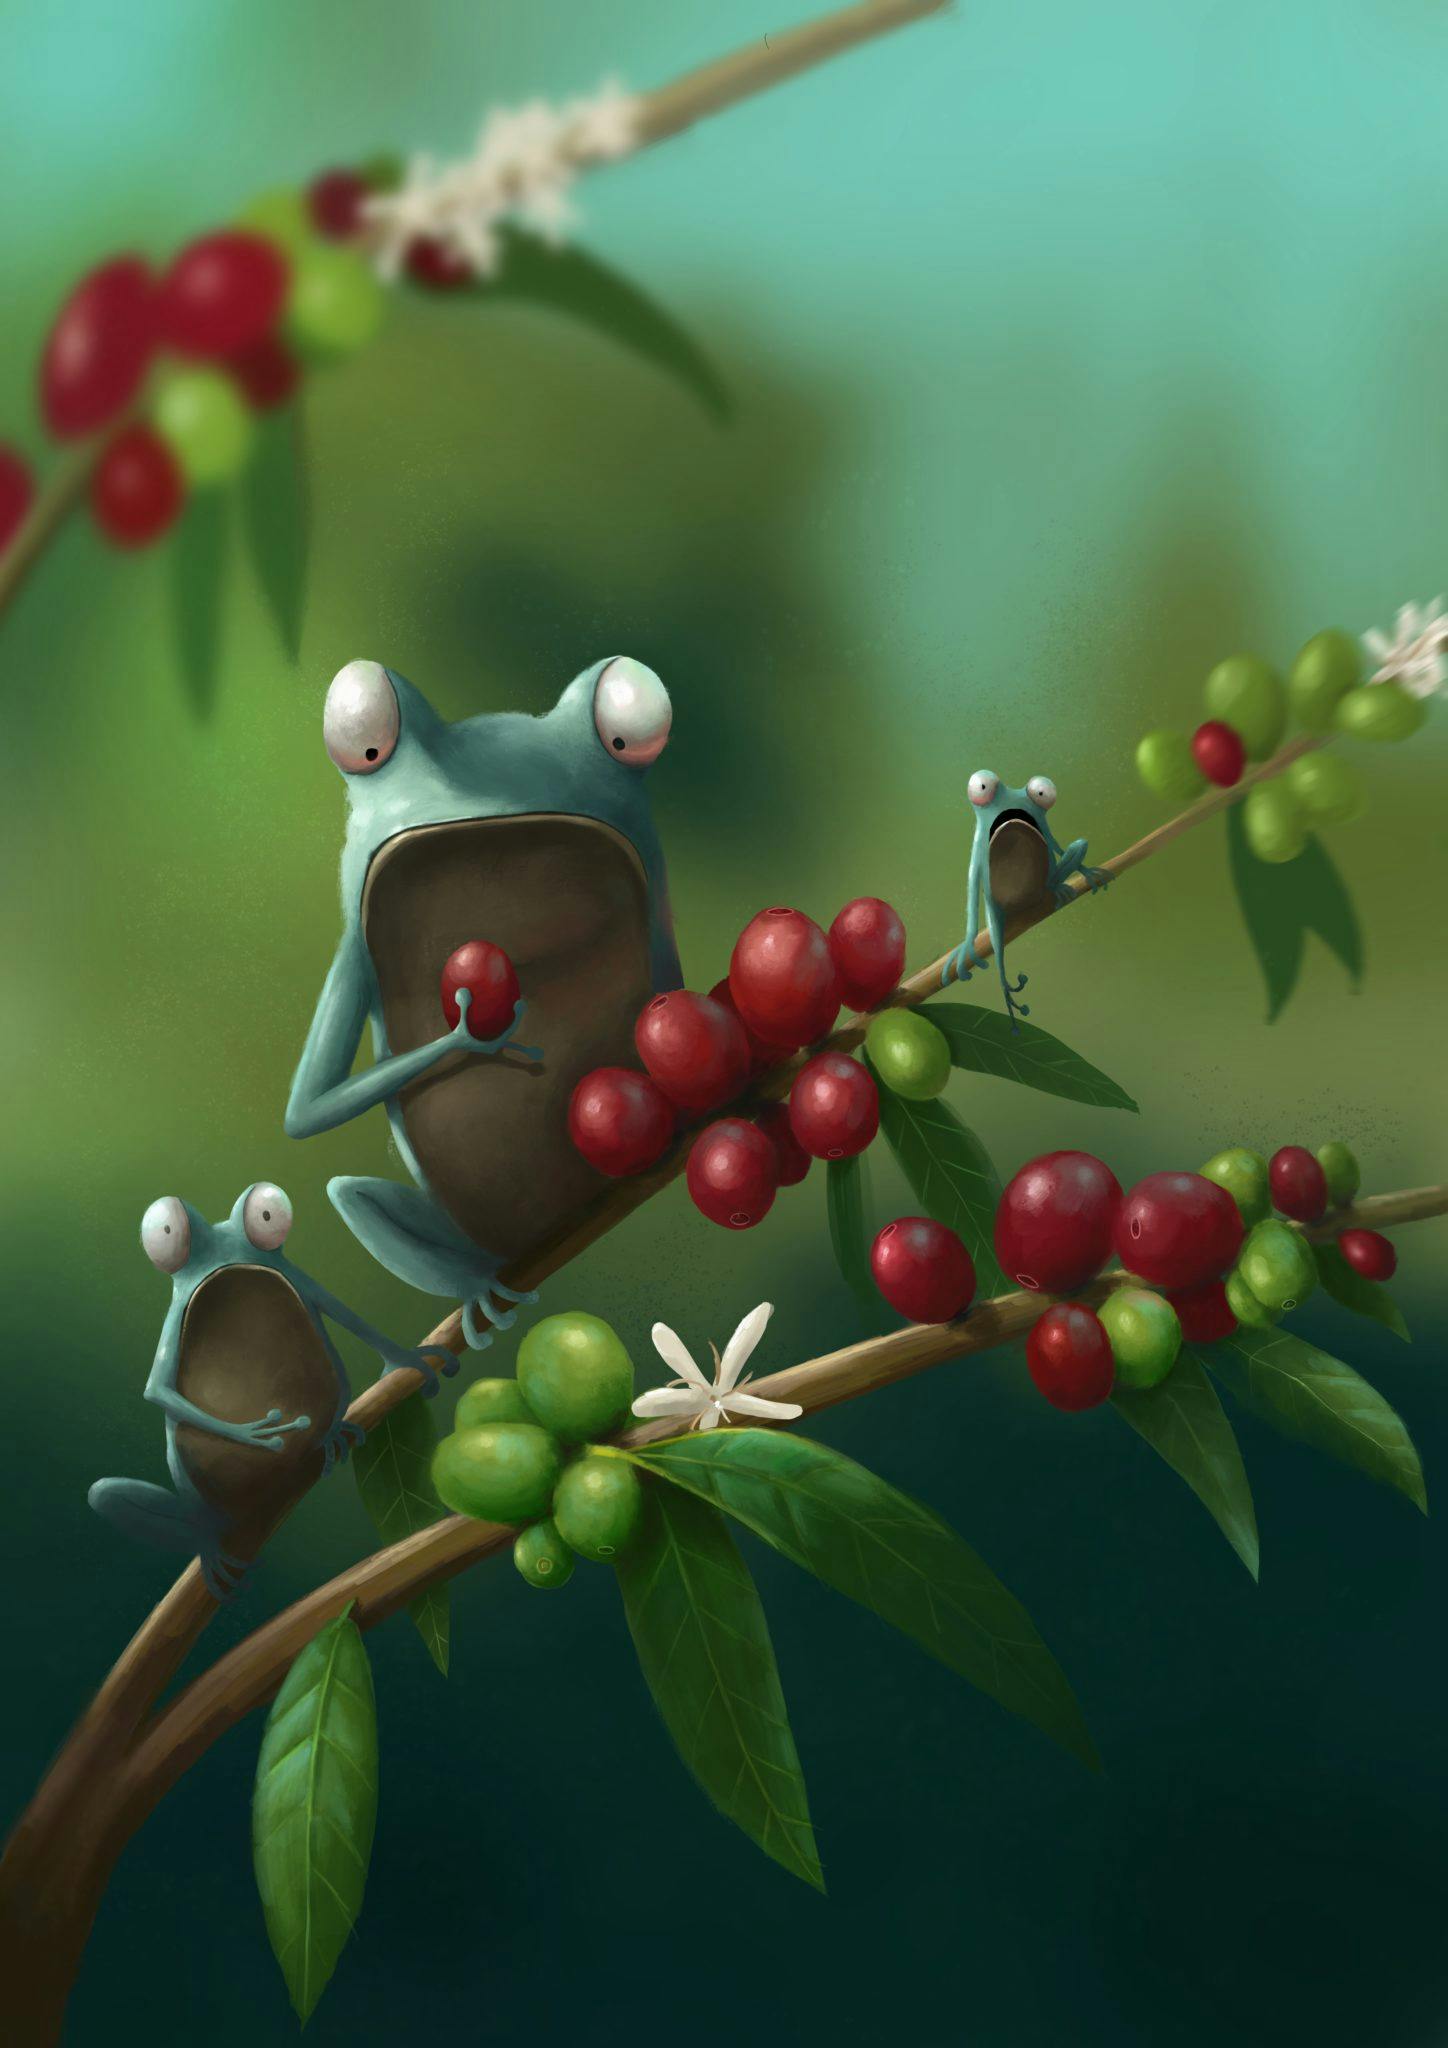 Three frogs in a tree